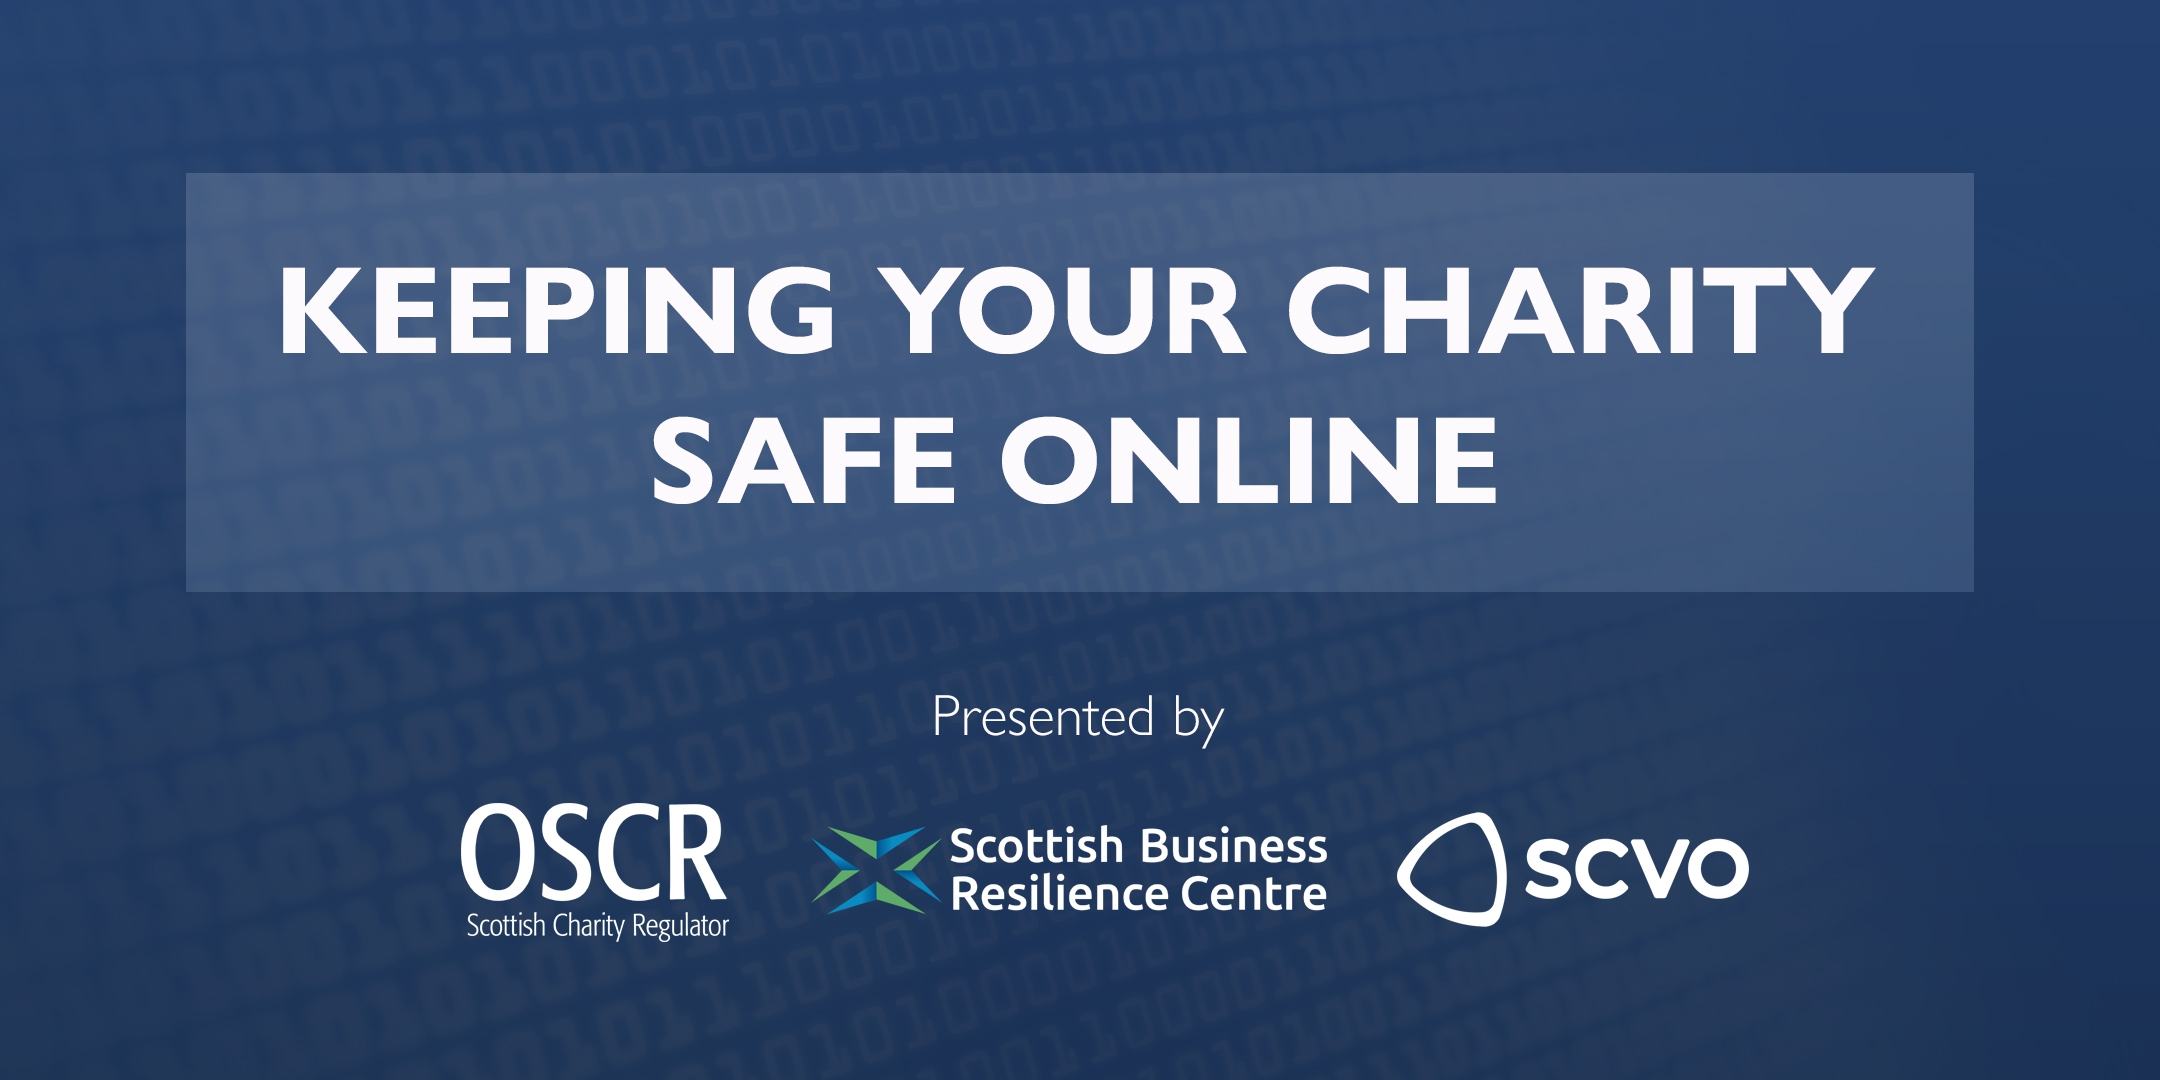 Video: Keeping your charity safe online webinar